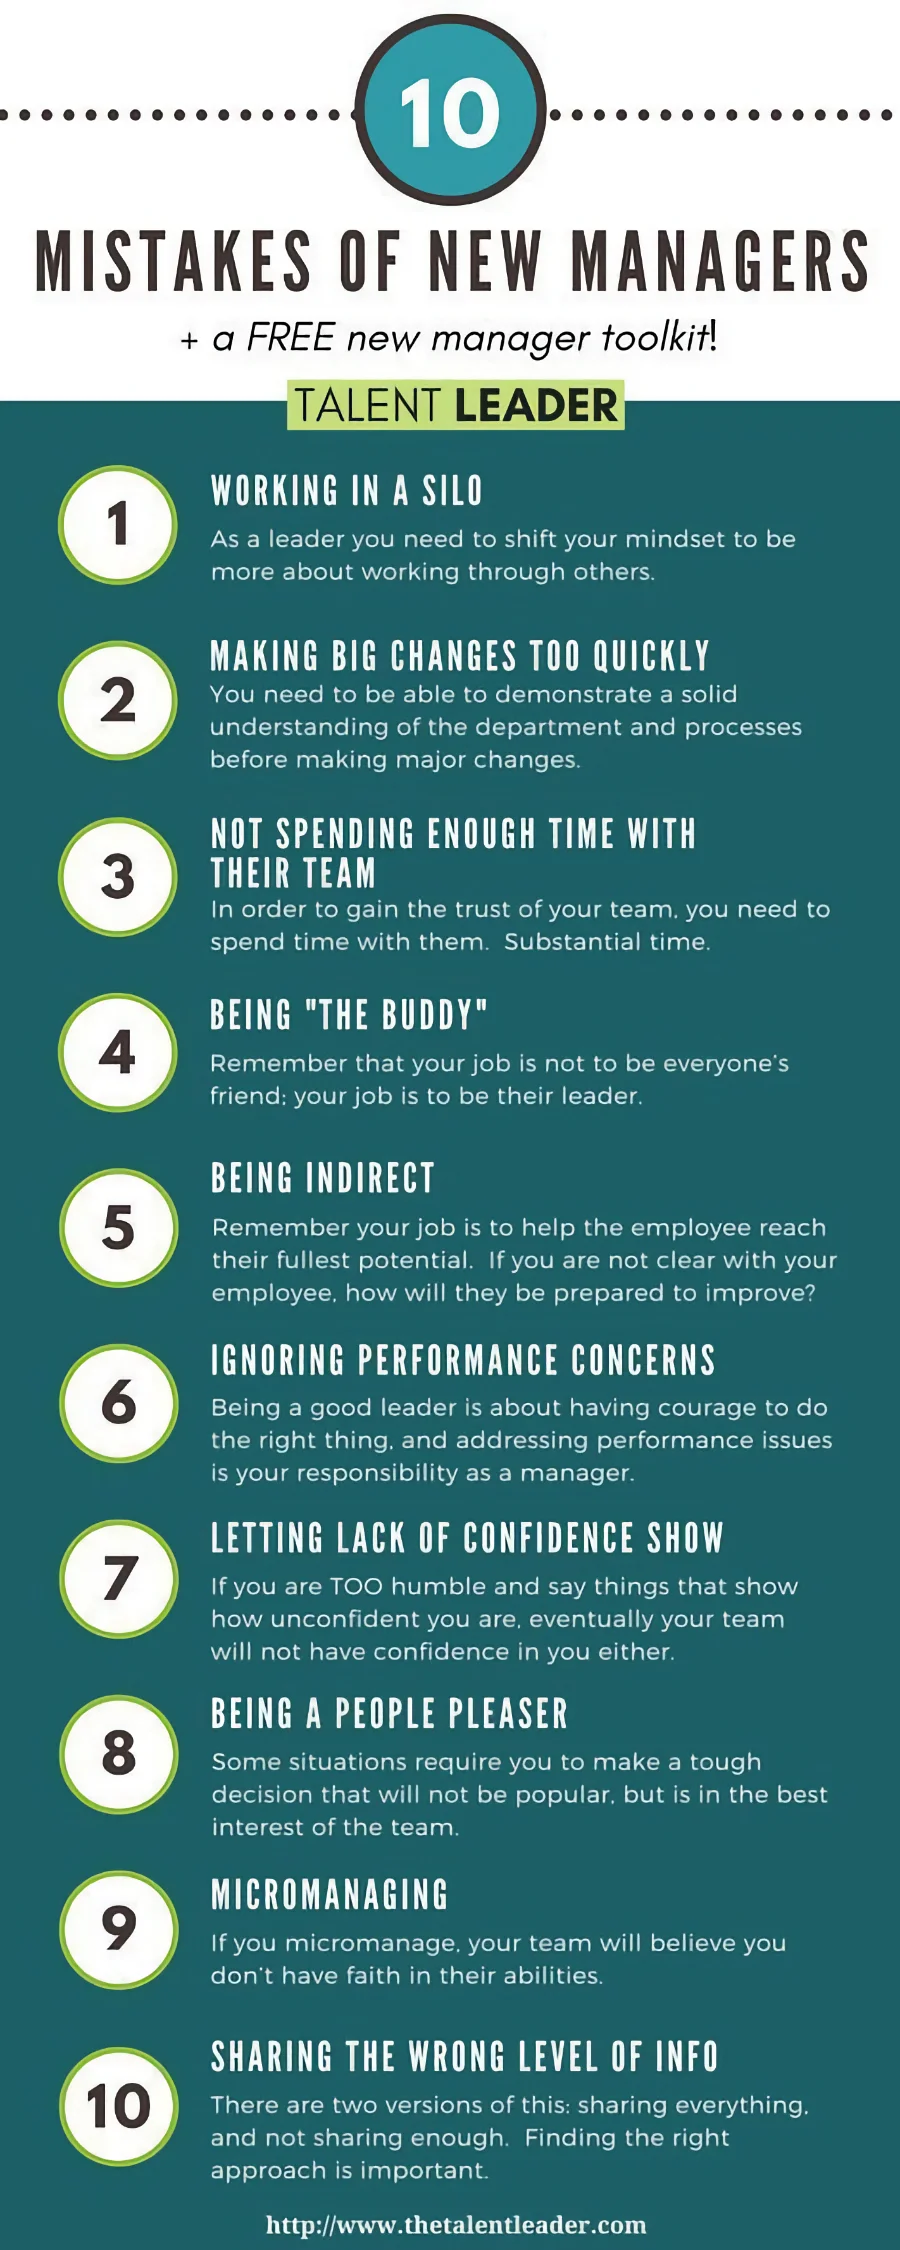 10 Mistakes of New Managers